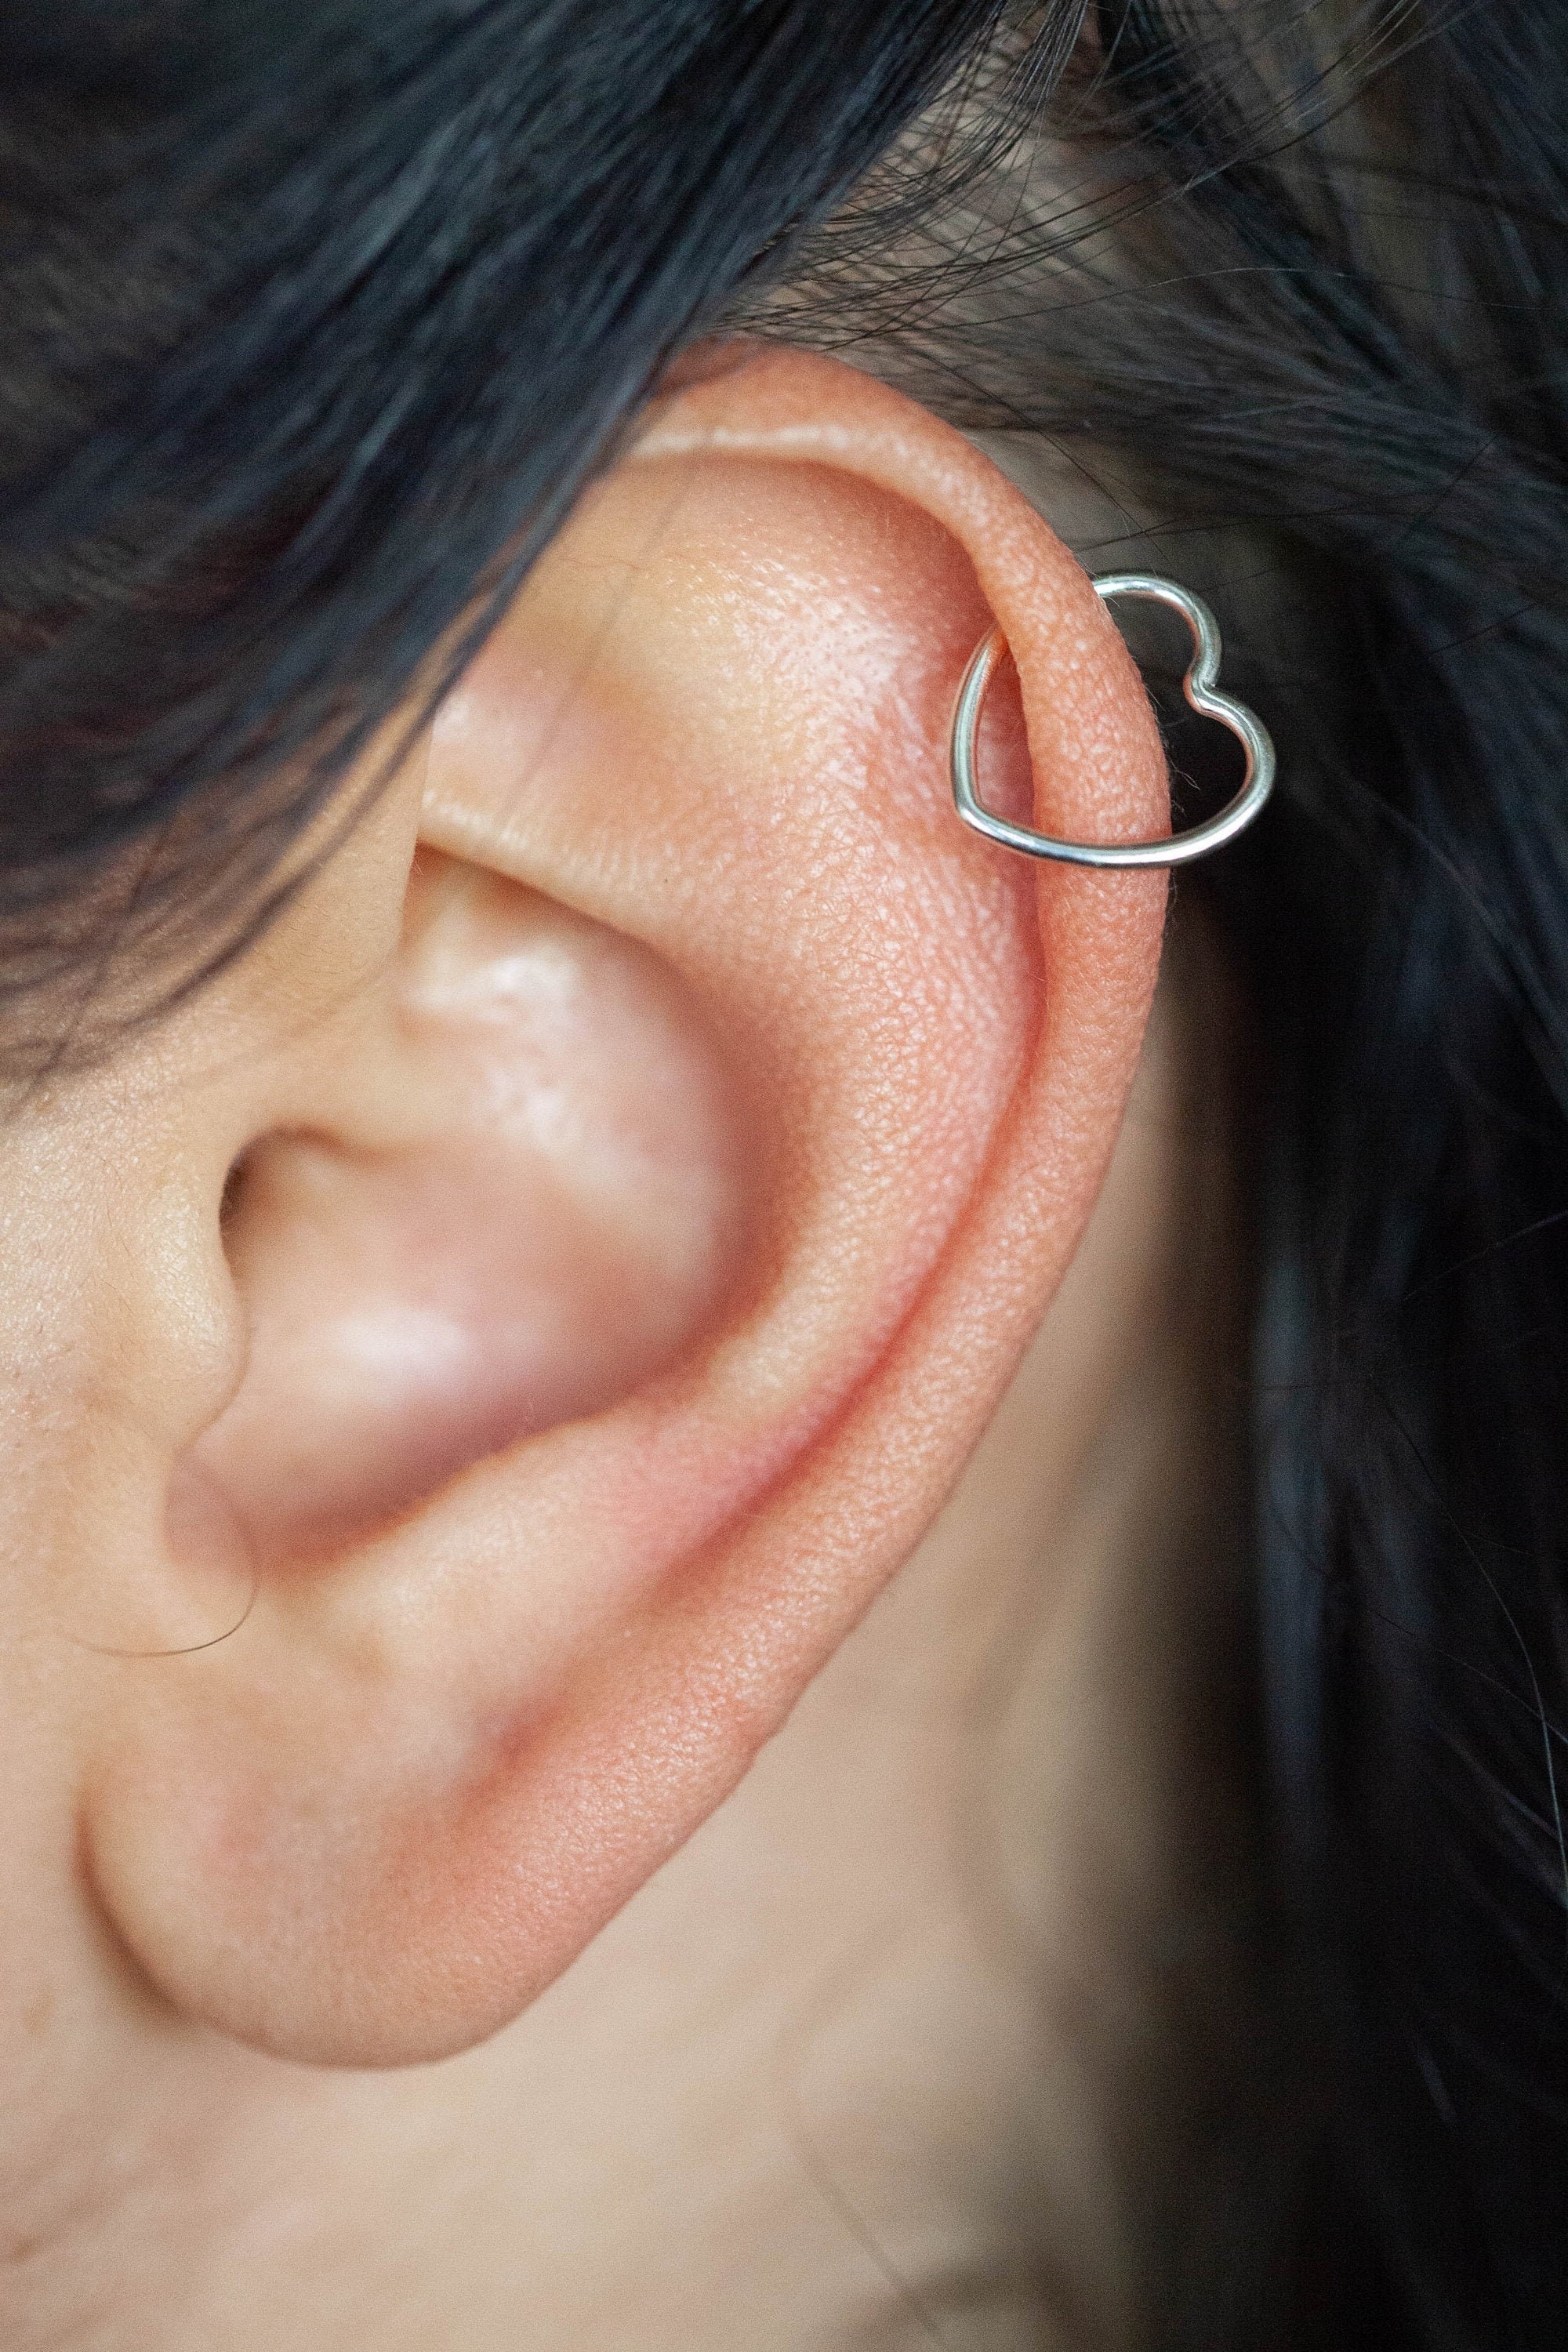 Statement Sterling Silver Ear Cuff Artisan Jewelry Faux No Piercing Layered Ear Wrap Earring Fits Cartilage & Helix 